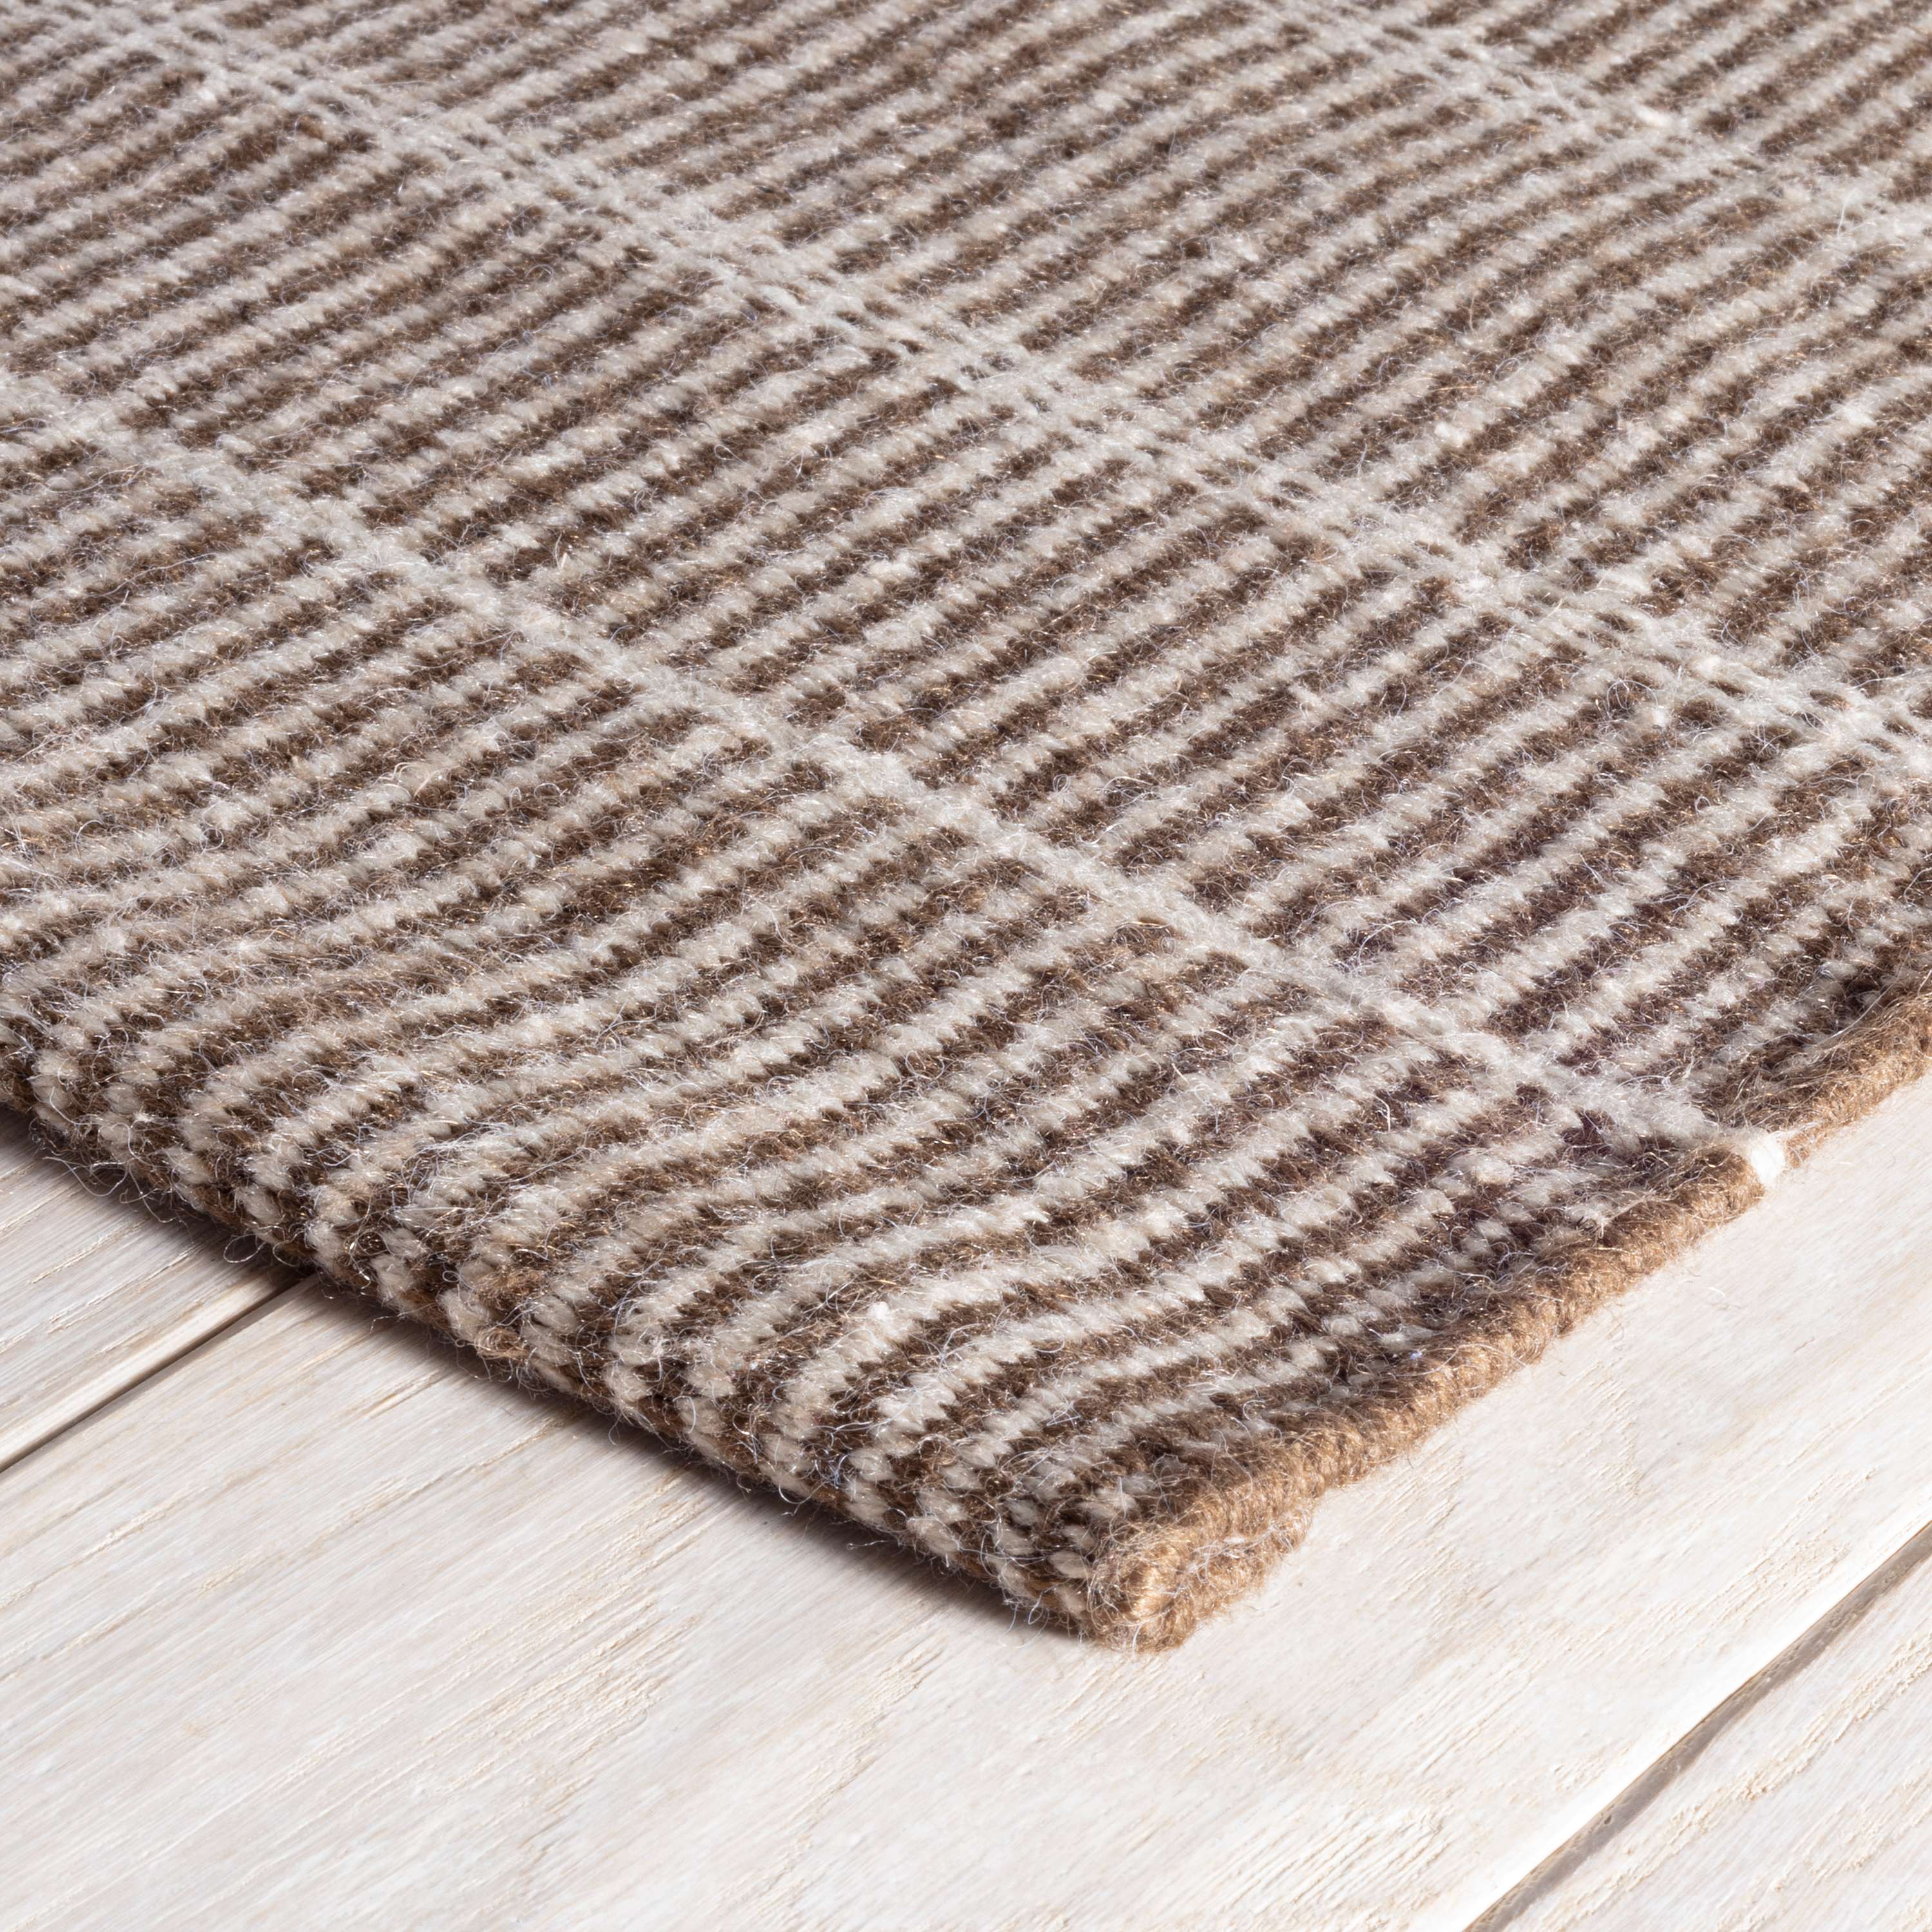 Part of our Designer Favorites collection of go-to rugs in timeless styles and a variety of durable constructions.<br><br>Part of our Bunny Williams collection, this delicately striped, dark brown indoor/outdoor rug was inspired by an antique rug sample from the designer's own personal collection. Due to the handmade nature of this area rug, variations in color are expected. Amethyst Home provides interior design, new construction, custom furniture, and area rugs in the Austin metro area.